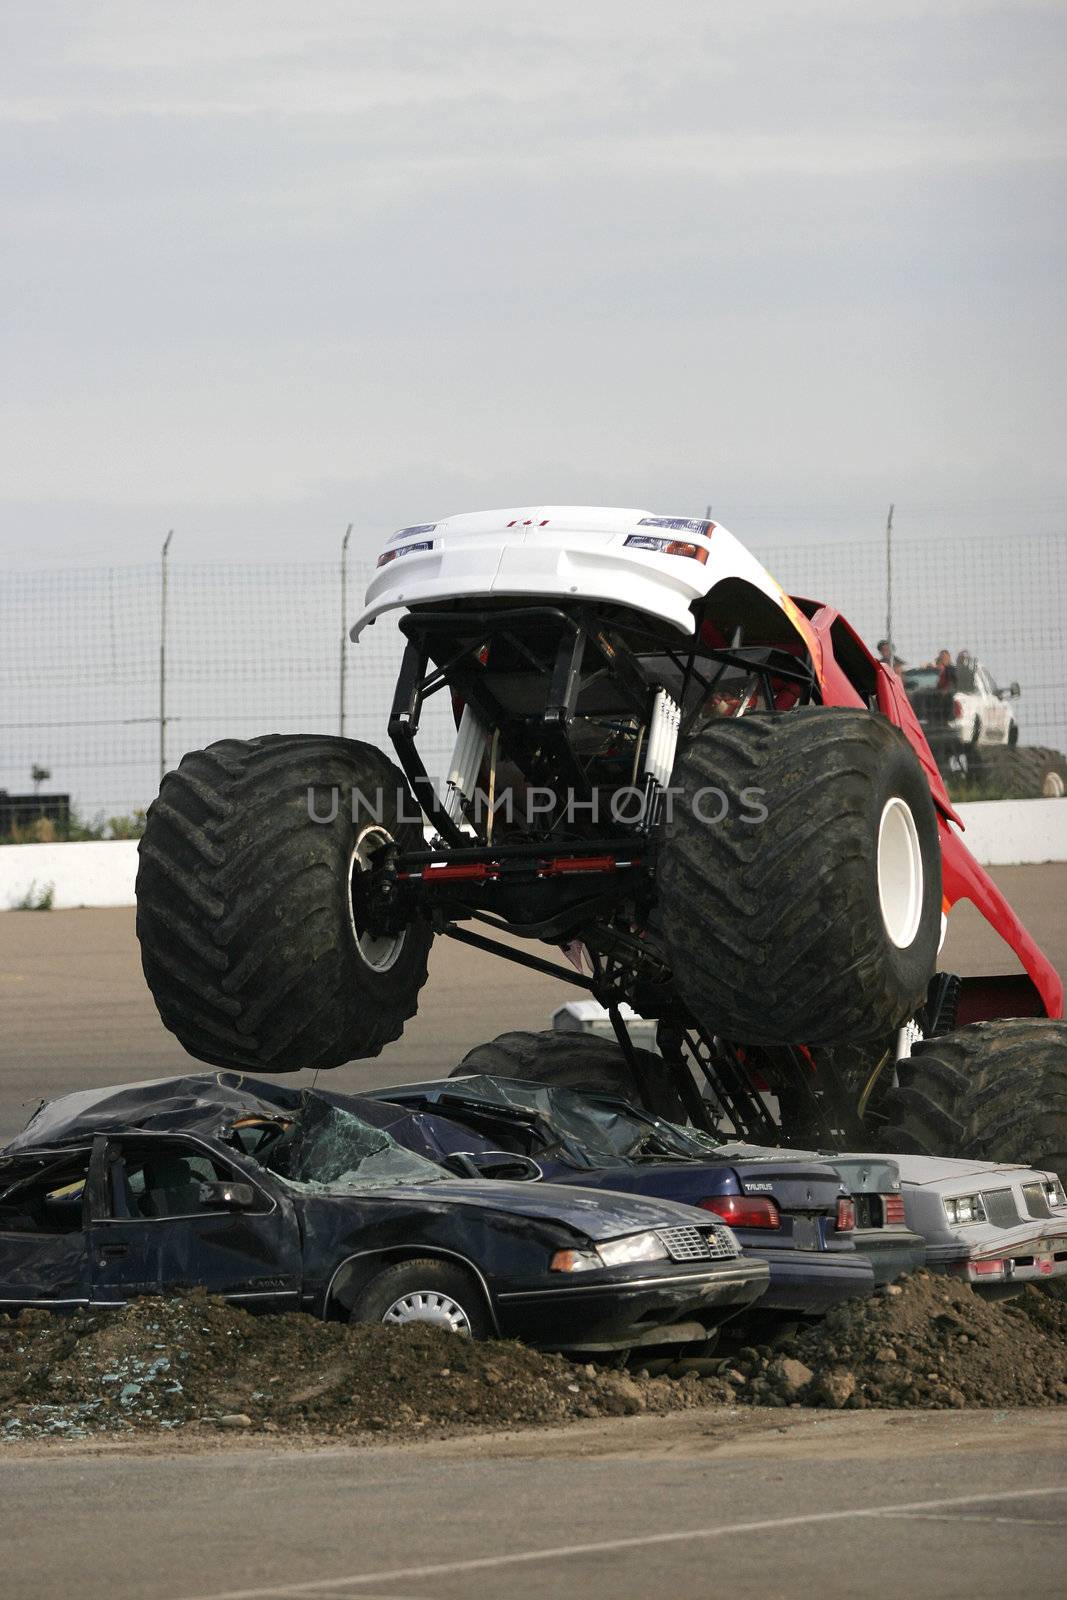 A monster truck jumps over cars